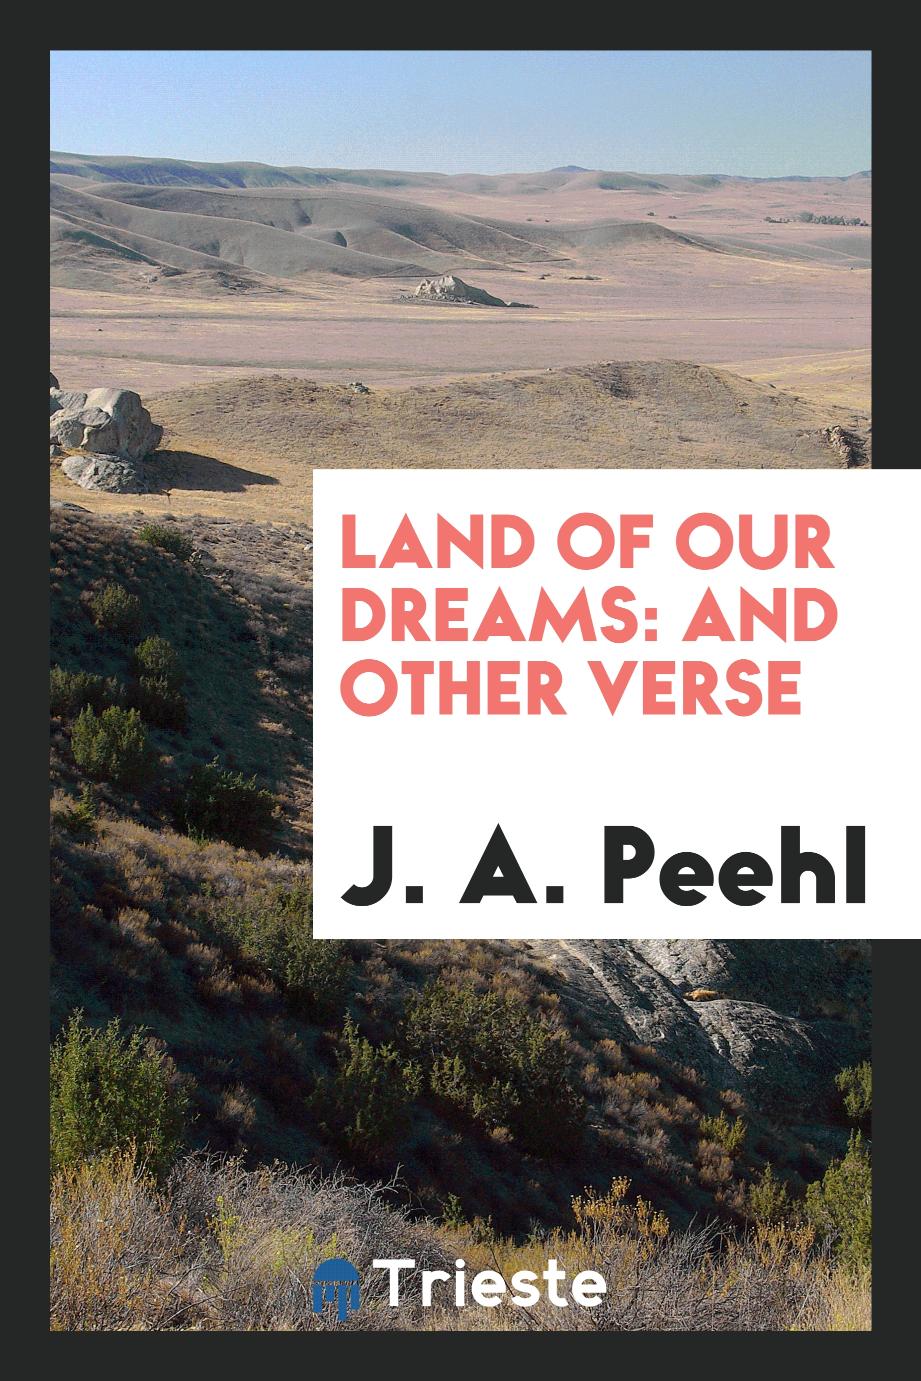 Land of Our Dreams: And Other Verse